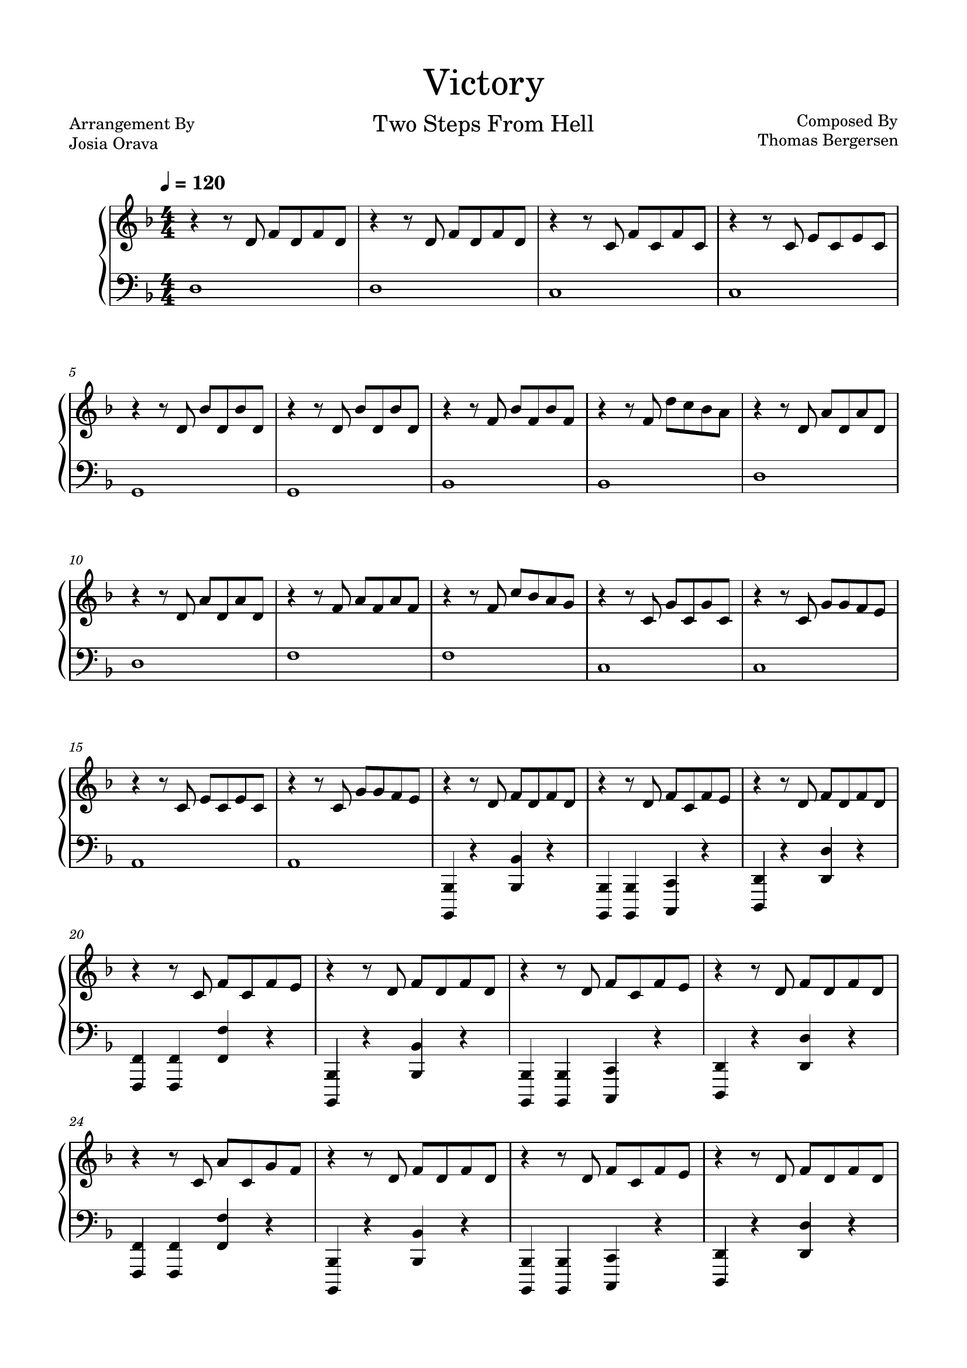 Two Steps From Hell - Victory (Piano Sheet) BY Josia Orava